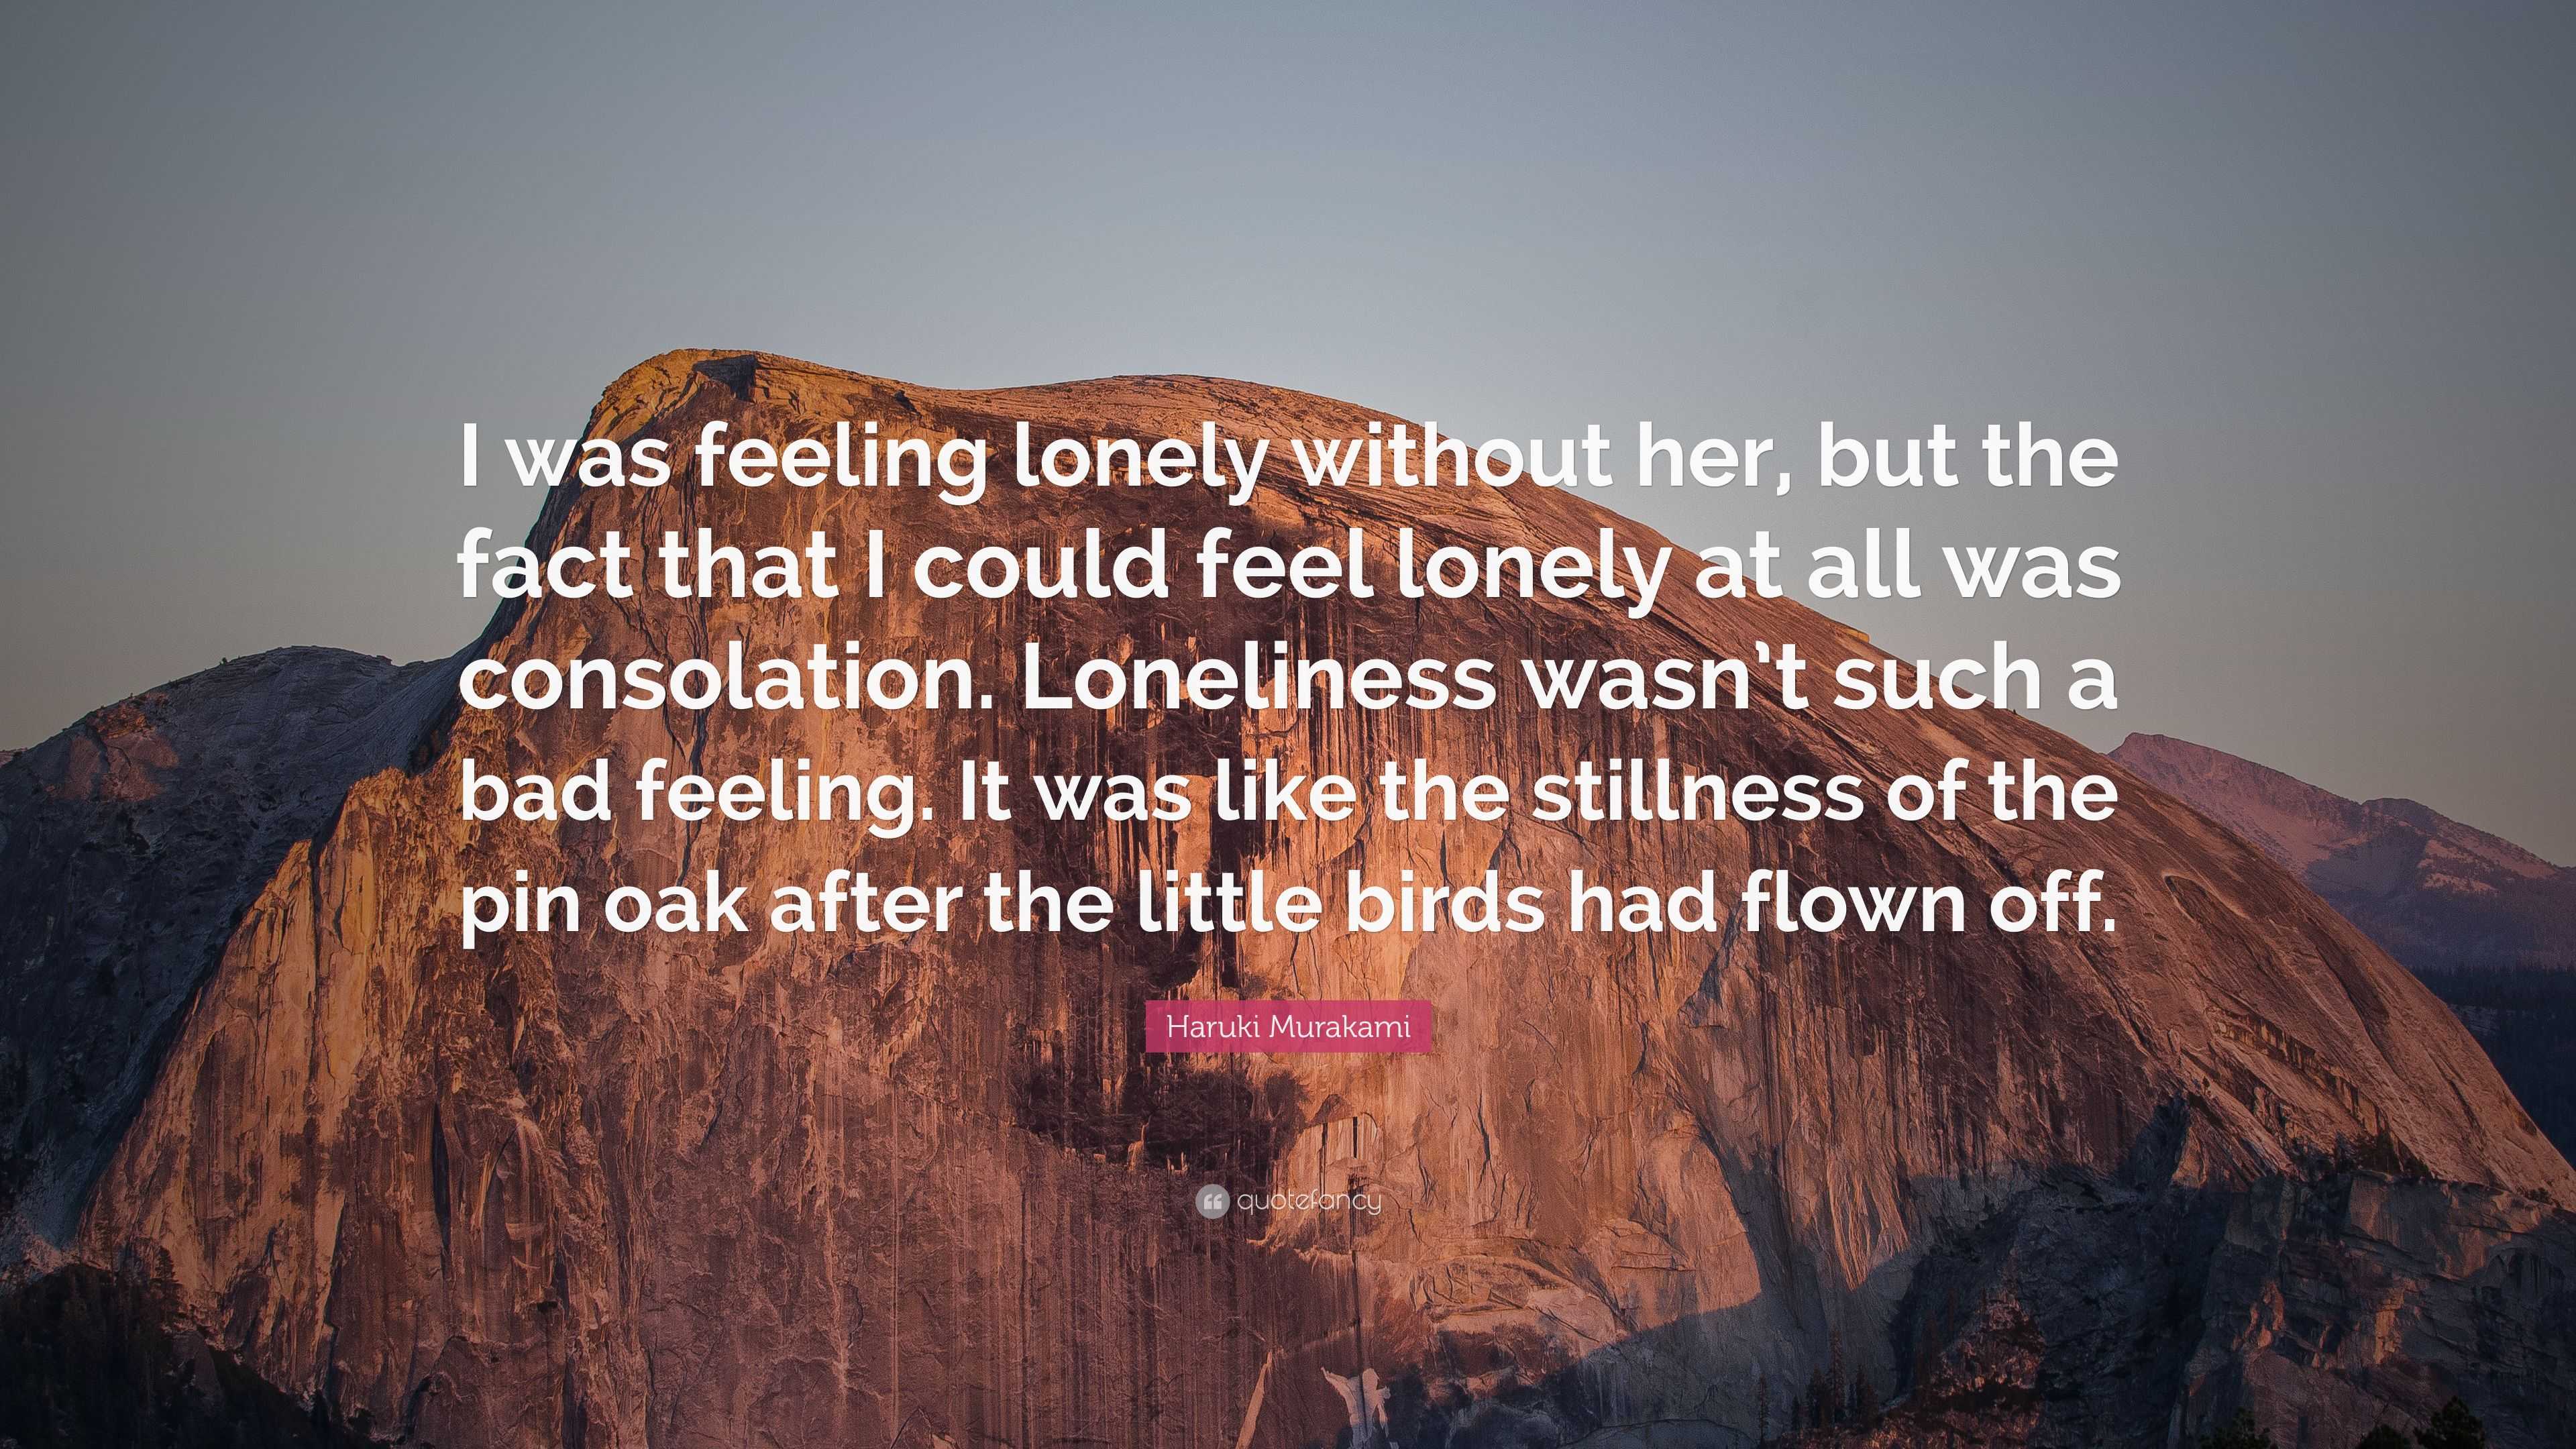 2485331 Haruki Murakami Quote I was feeling lonely without her but the